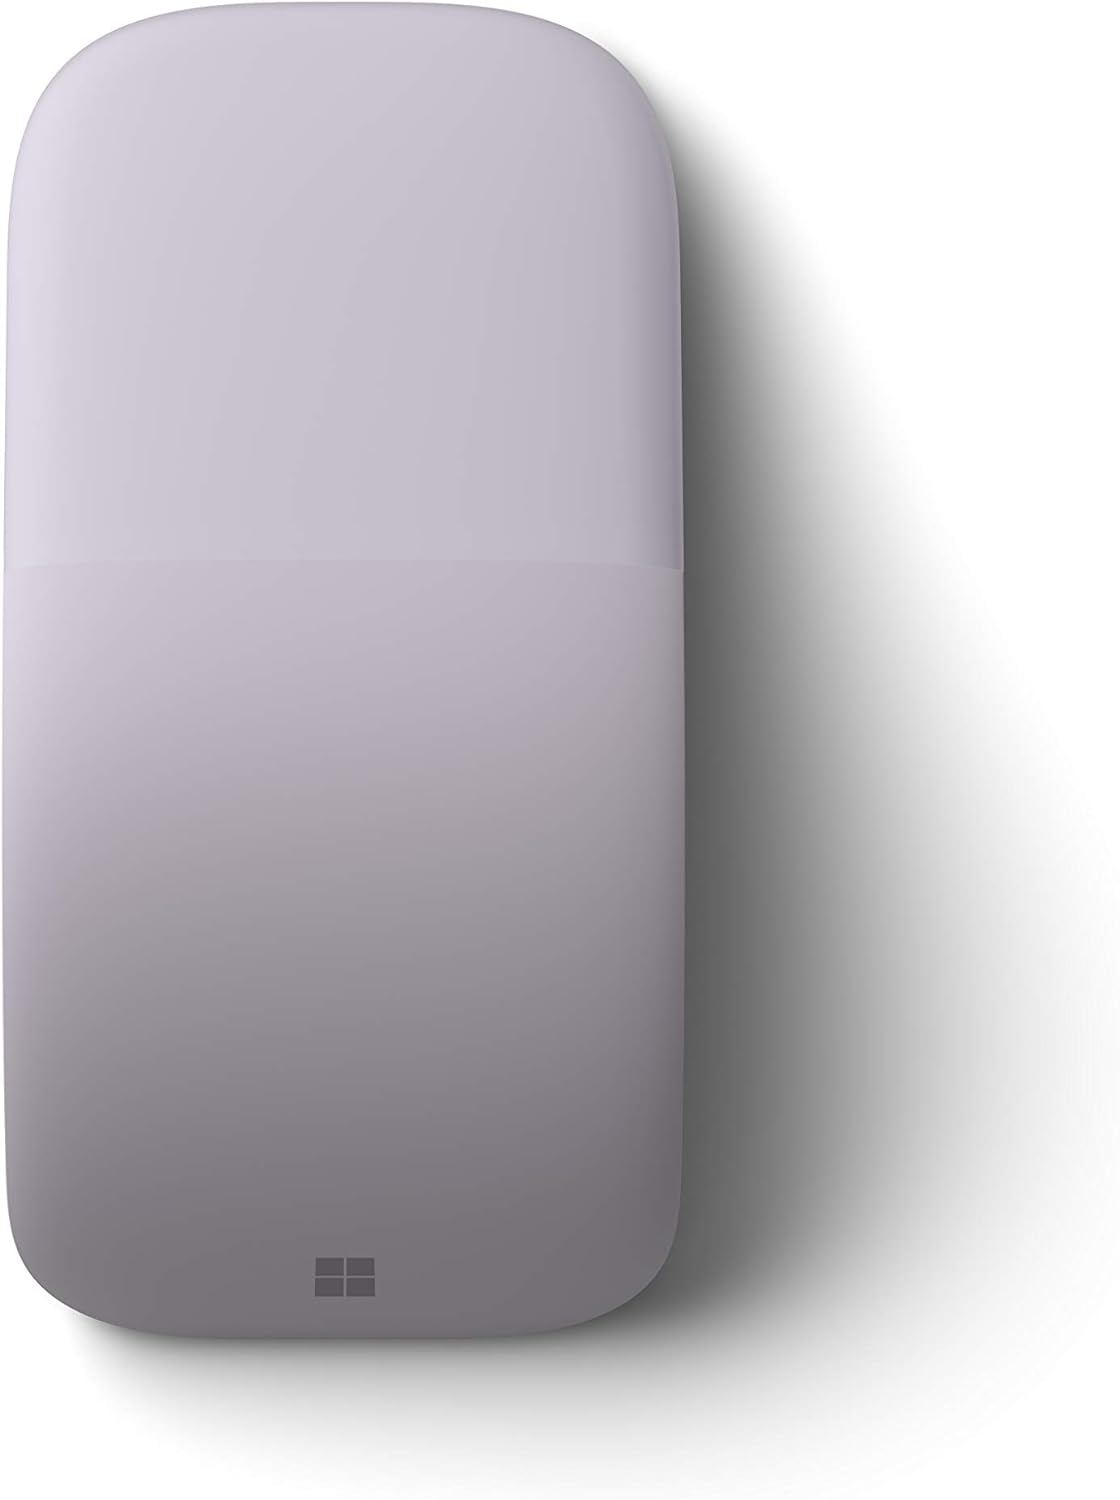 **Microsoft ARC Mouse –  review